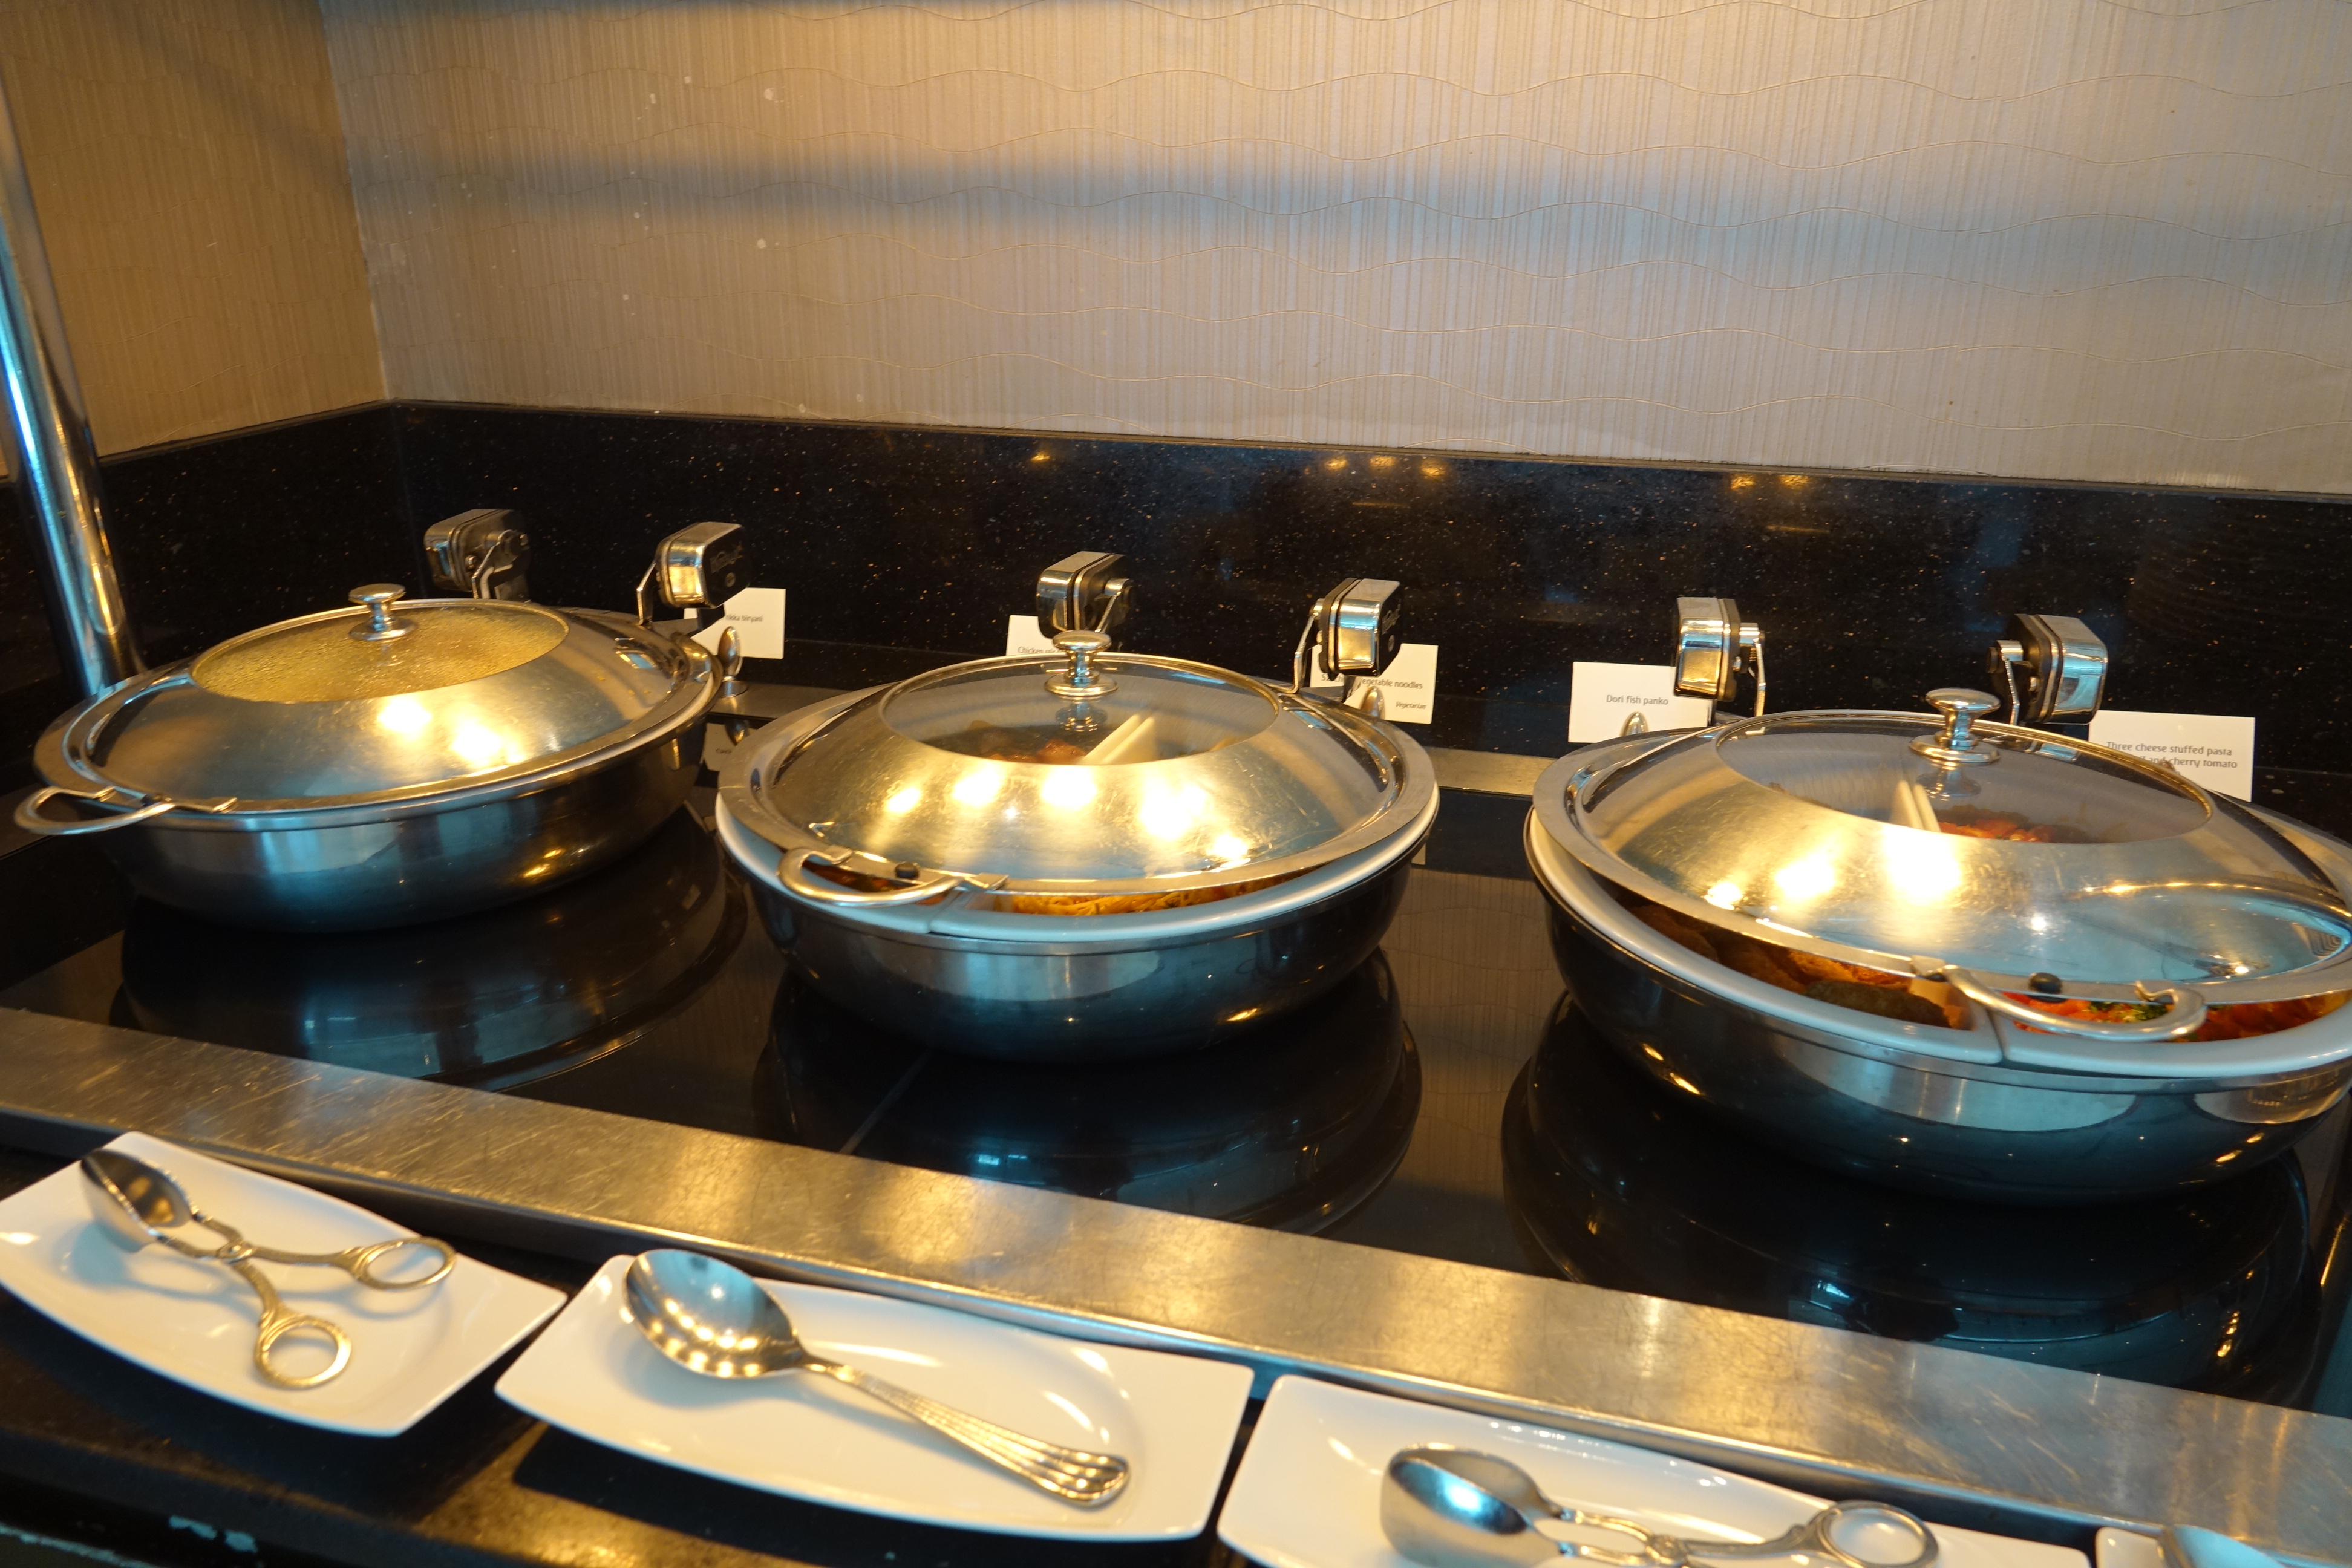 a row of silver bowls with lids on a black counter